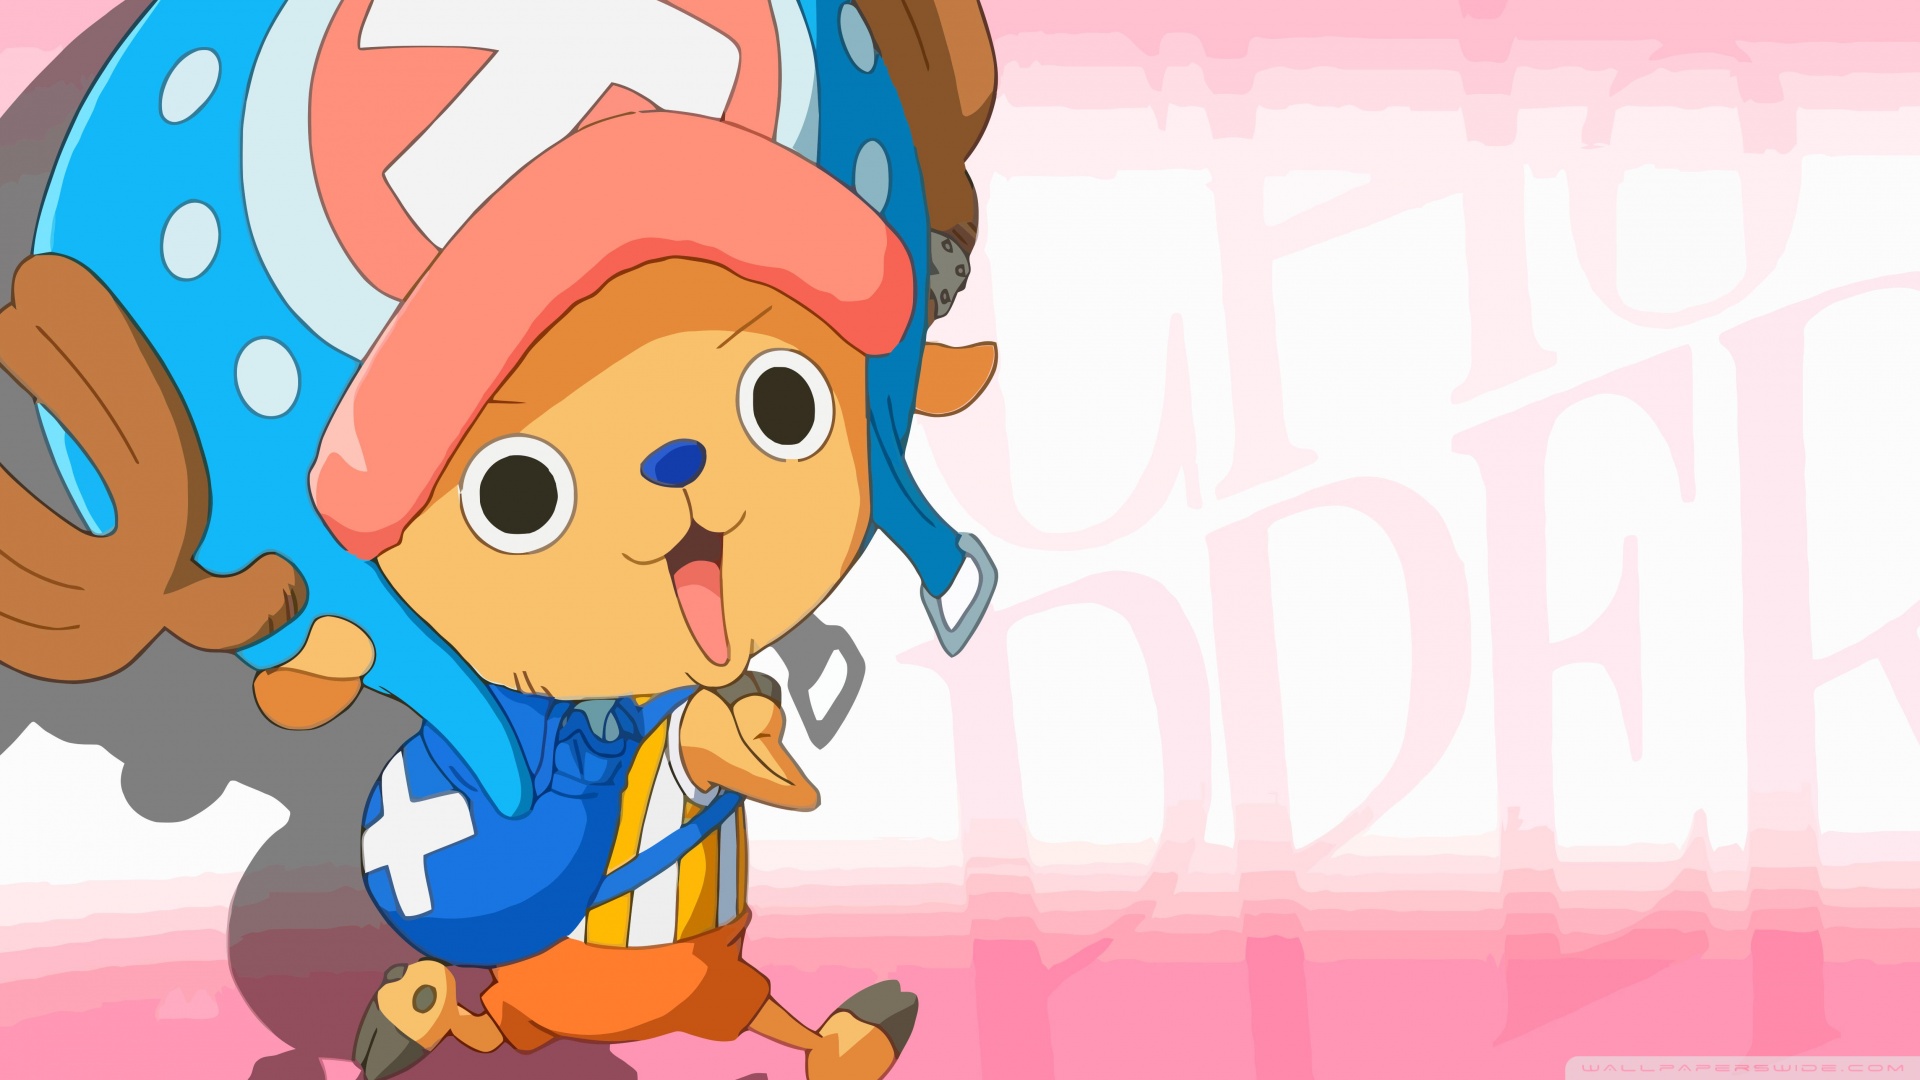 Chopper Background Images, HD Pictures and Wallpaper For Free Download |  Pngtree